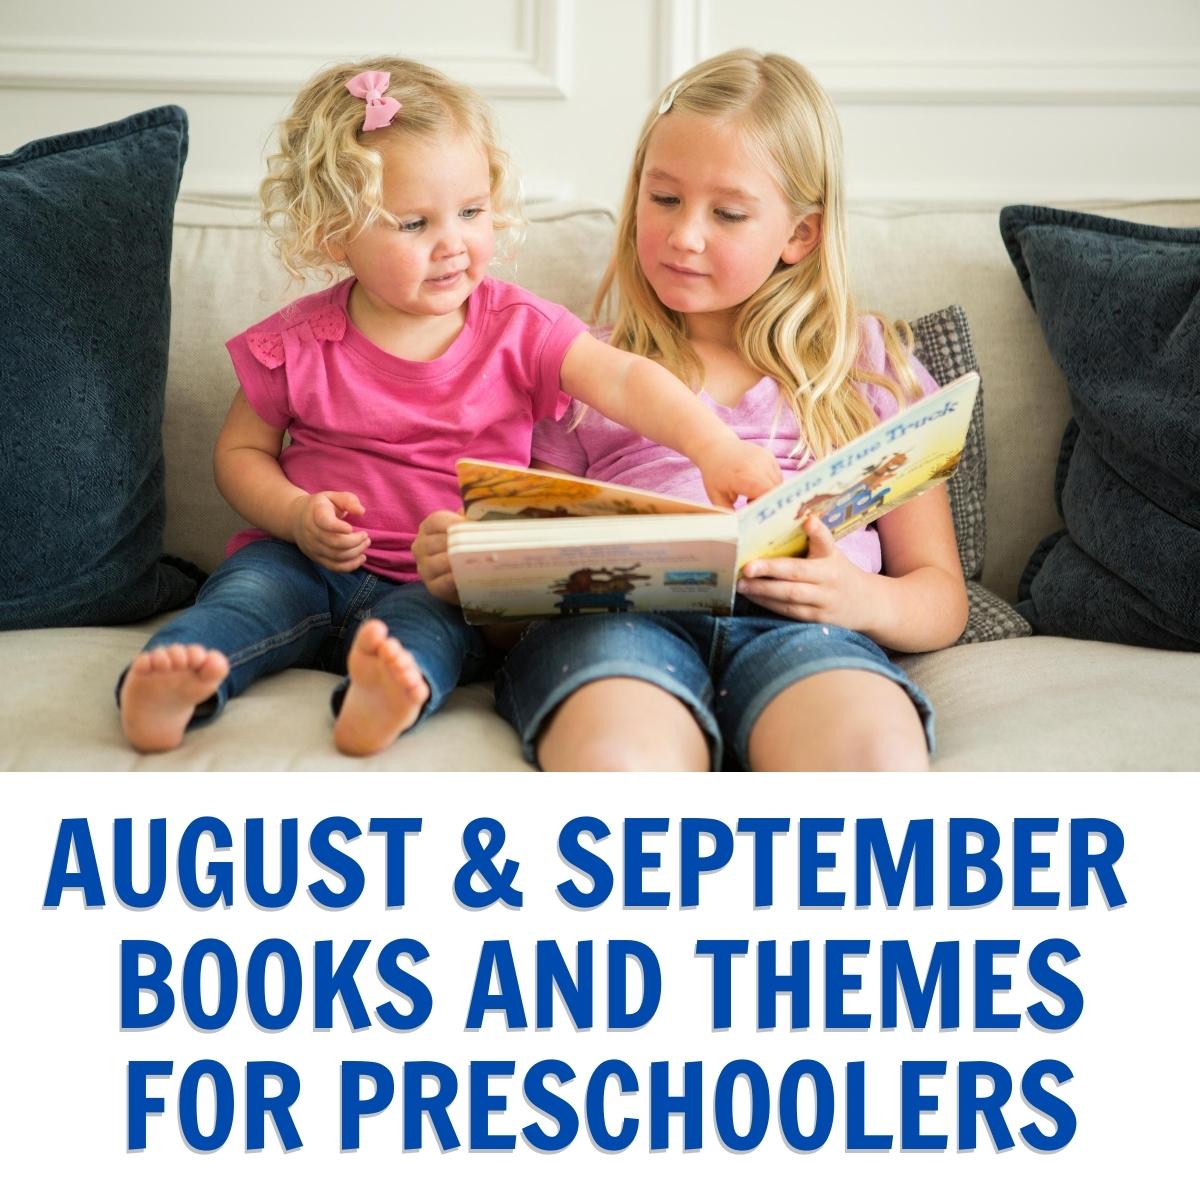 preschooler and child reading a book together, text below reads August and September Books and Themes for Preschoolers